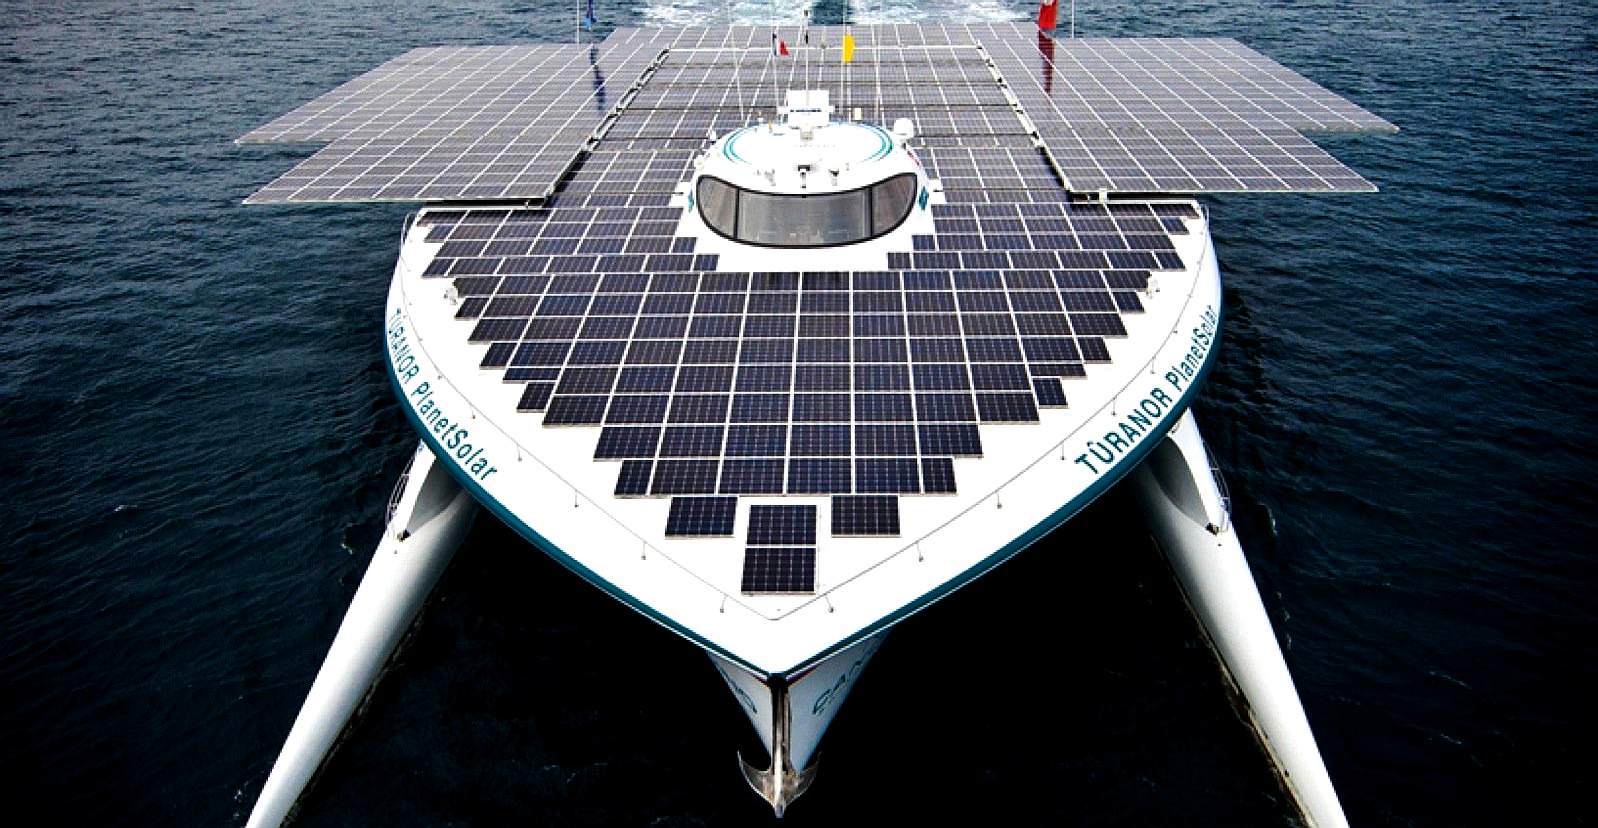 The largest solar powered boat in the world as of January 2019